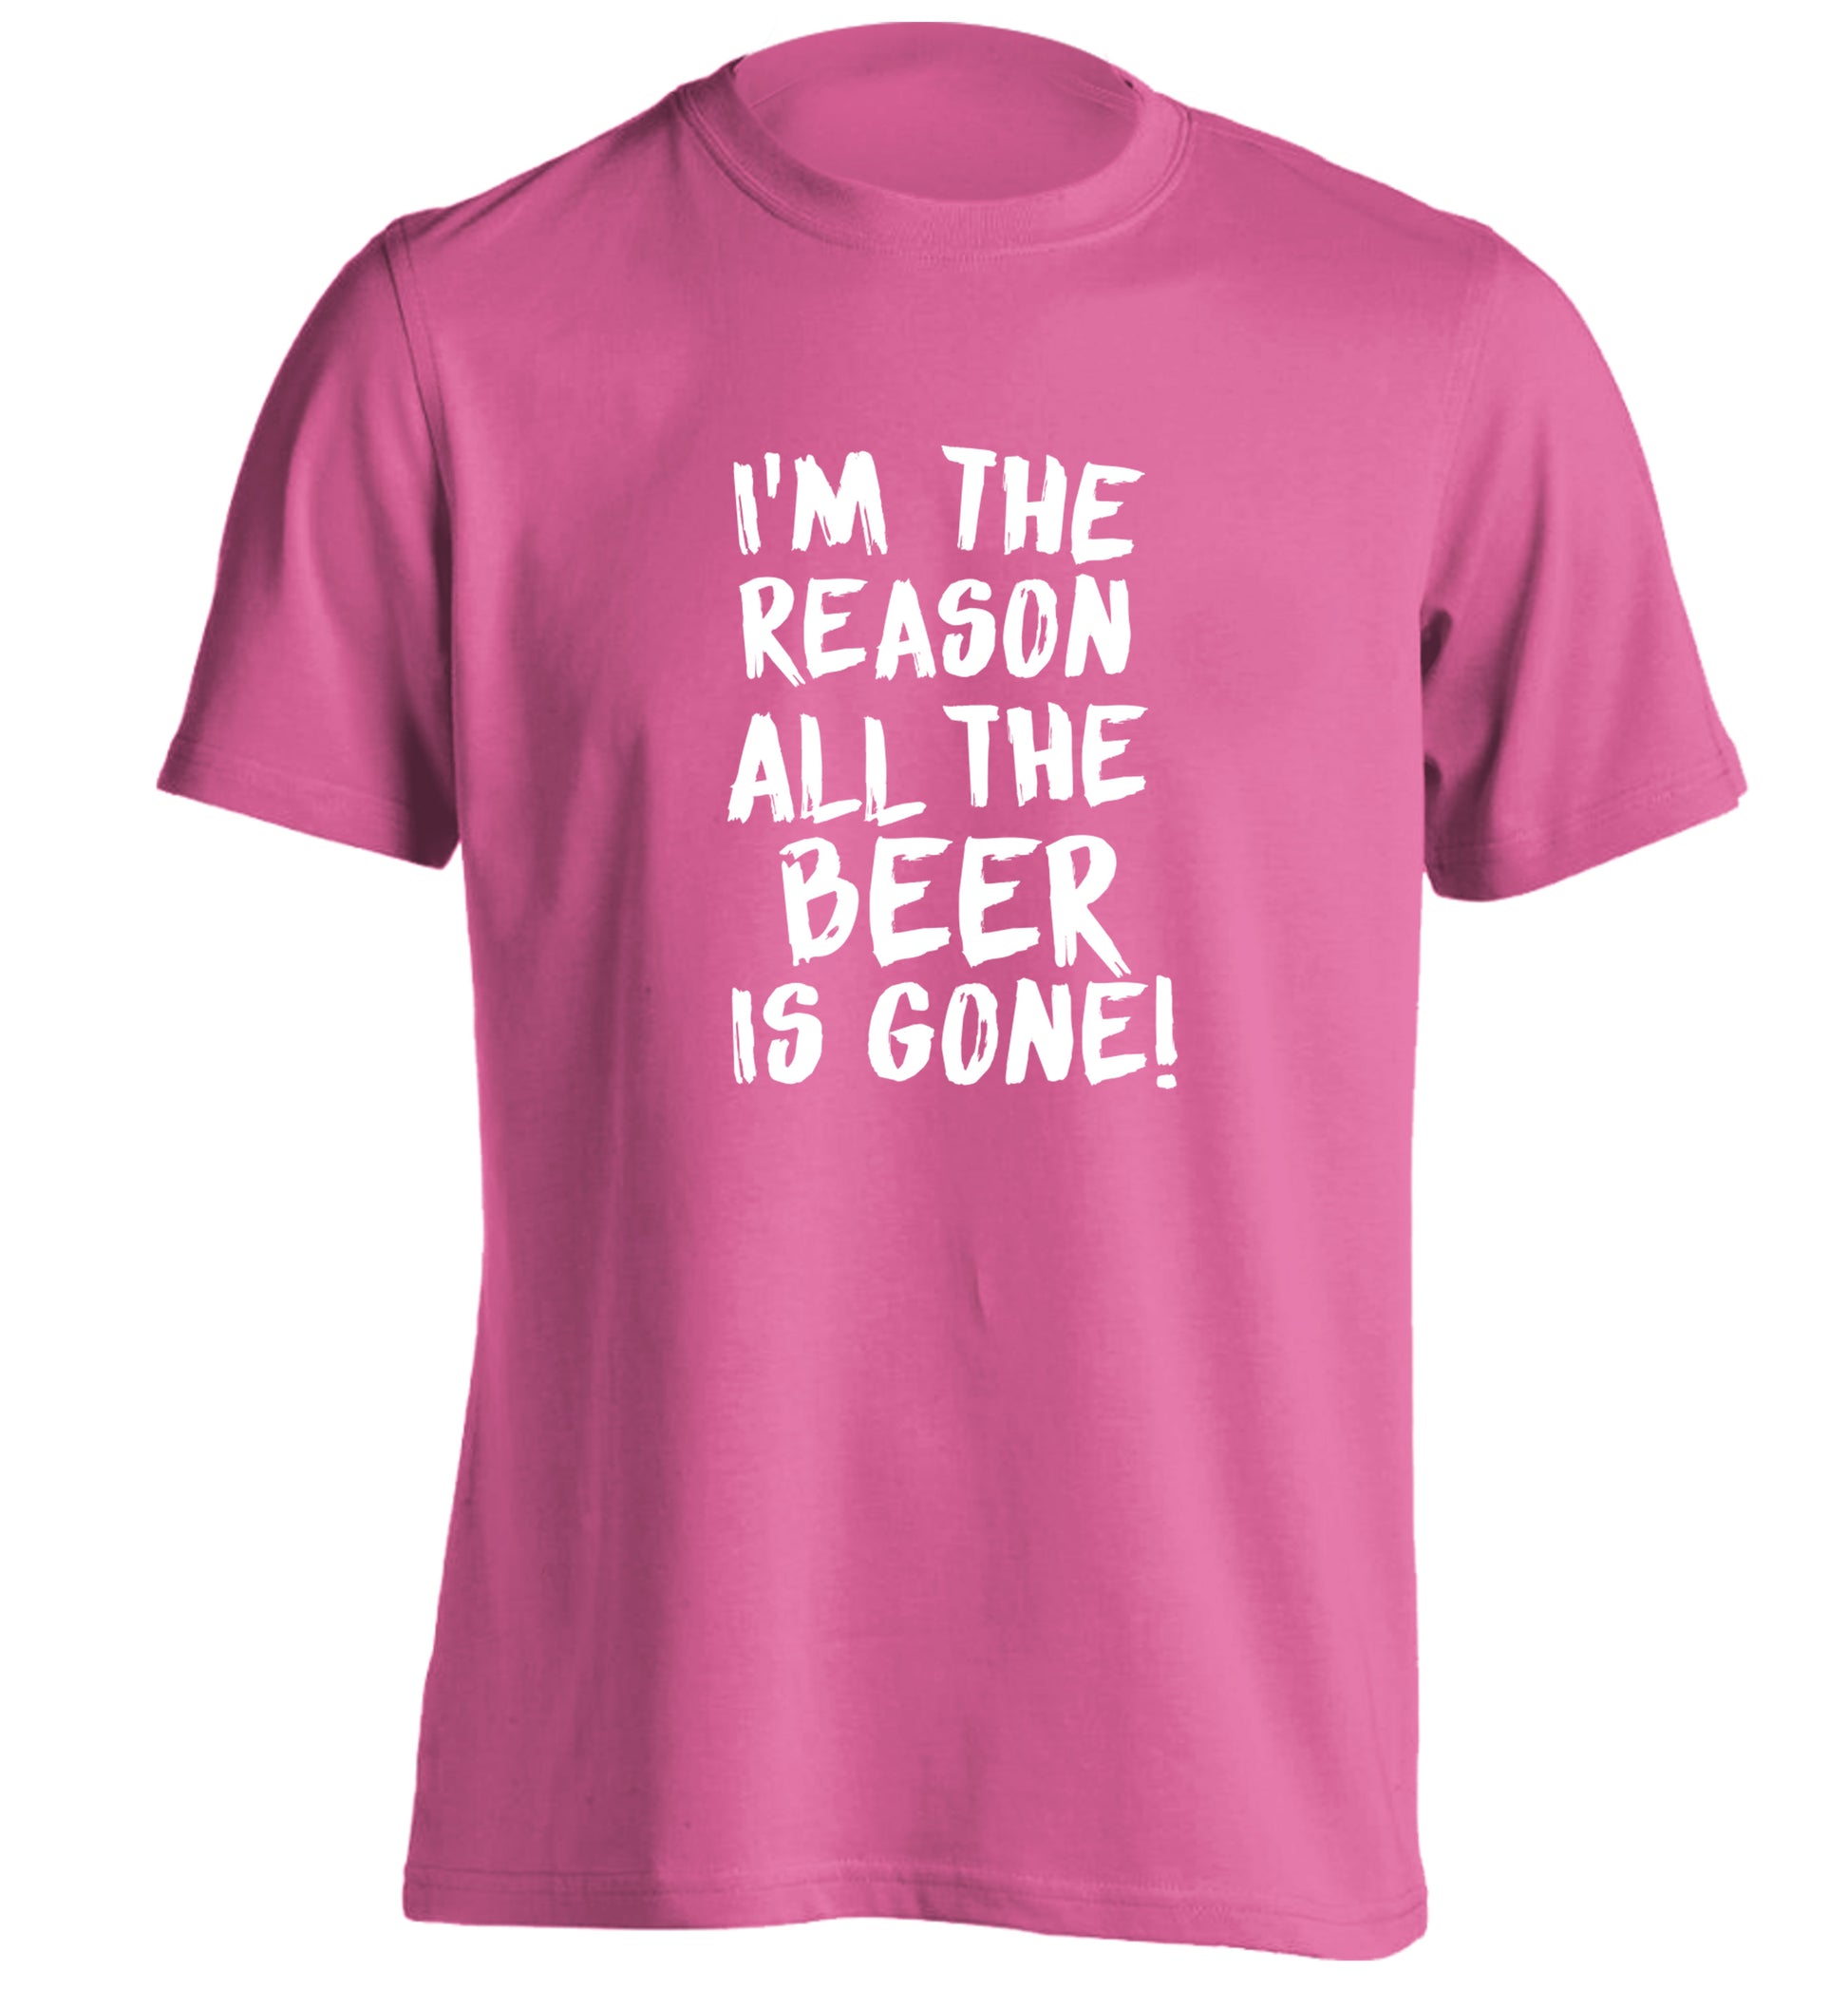 I'm the reason all the beer is gone adults unisex pink Tshirt 2XL